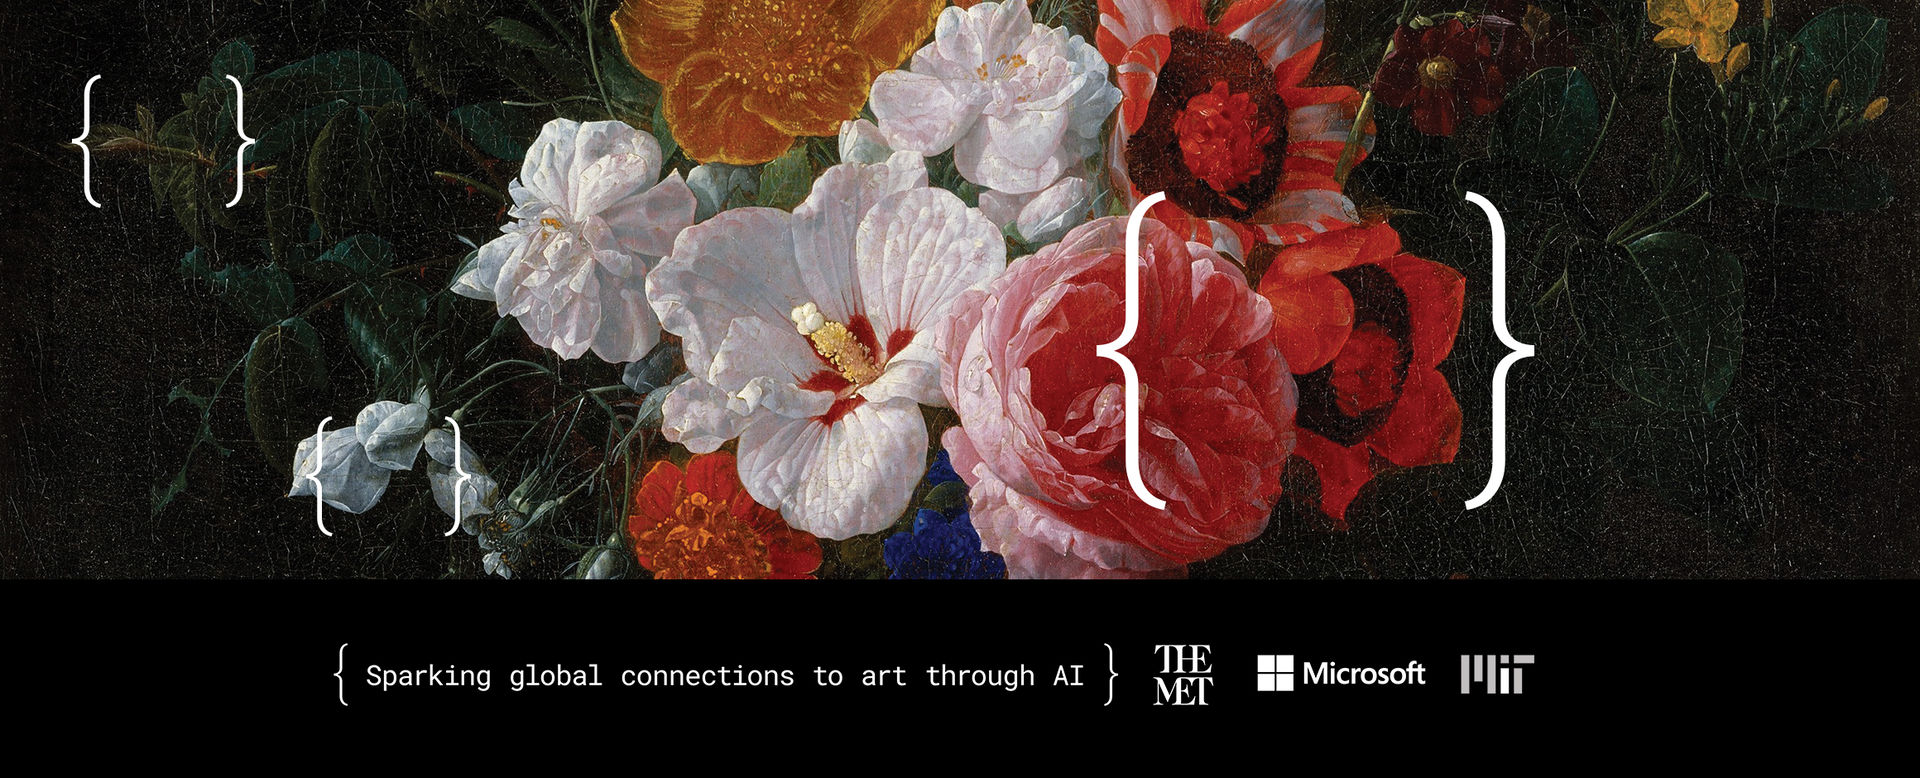 "Sparking global connections to art through AI" | Logos of The Met, Microsoft, and MIT against the background of a detail of a Dutch floral still life